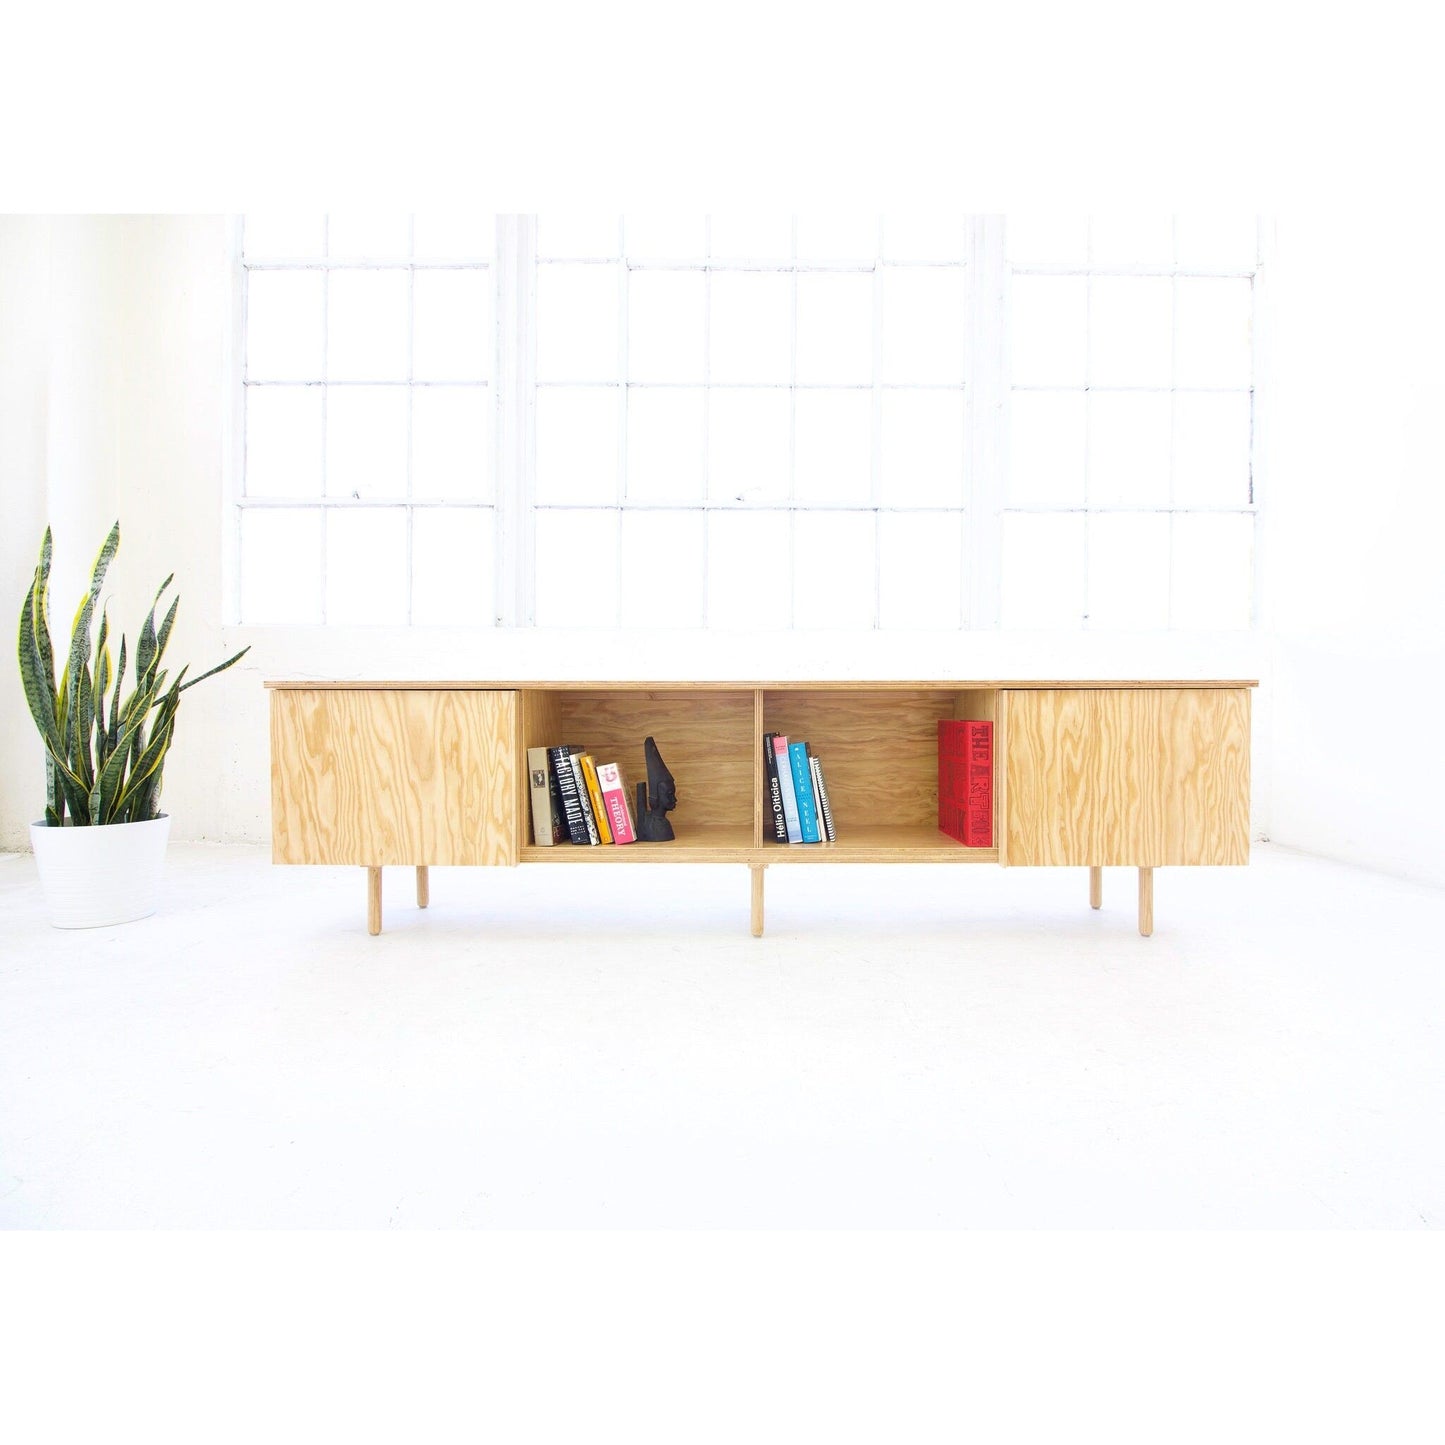 Vinyl Record Storage Cabinet |Doug Fir | Minimalist| Modern Sideboard| Open With Center Shelves | Plywood Furniture | Made in LA